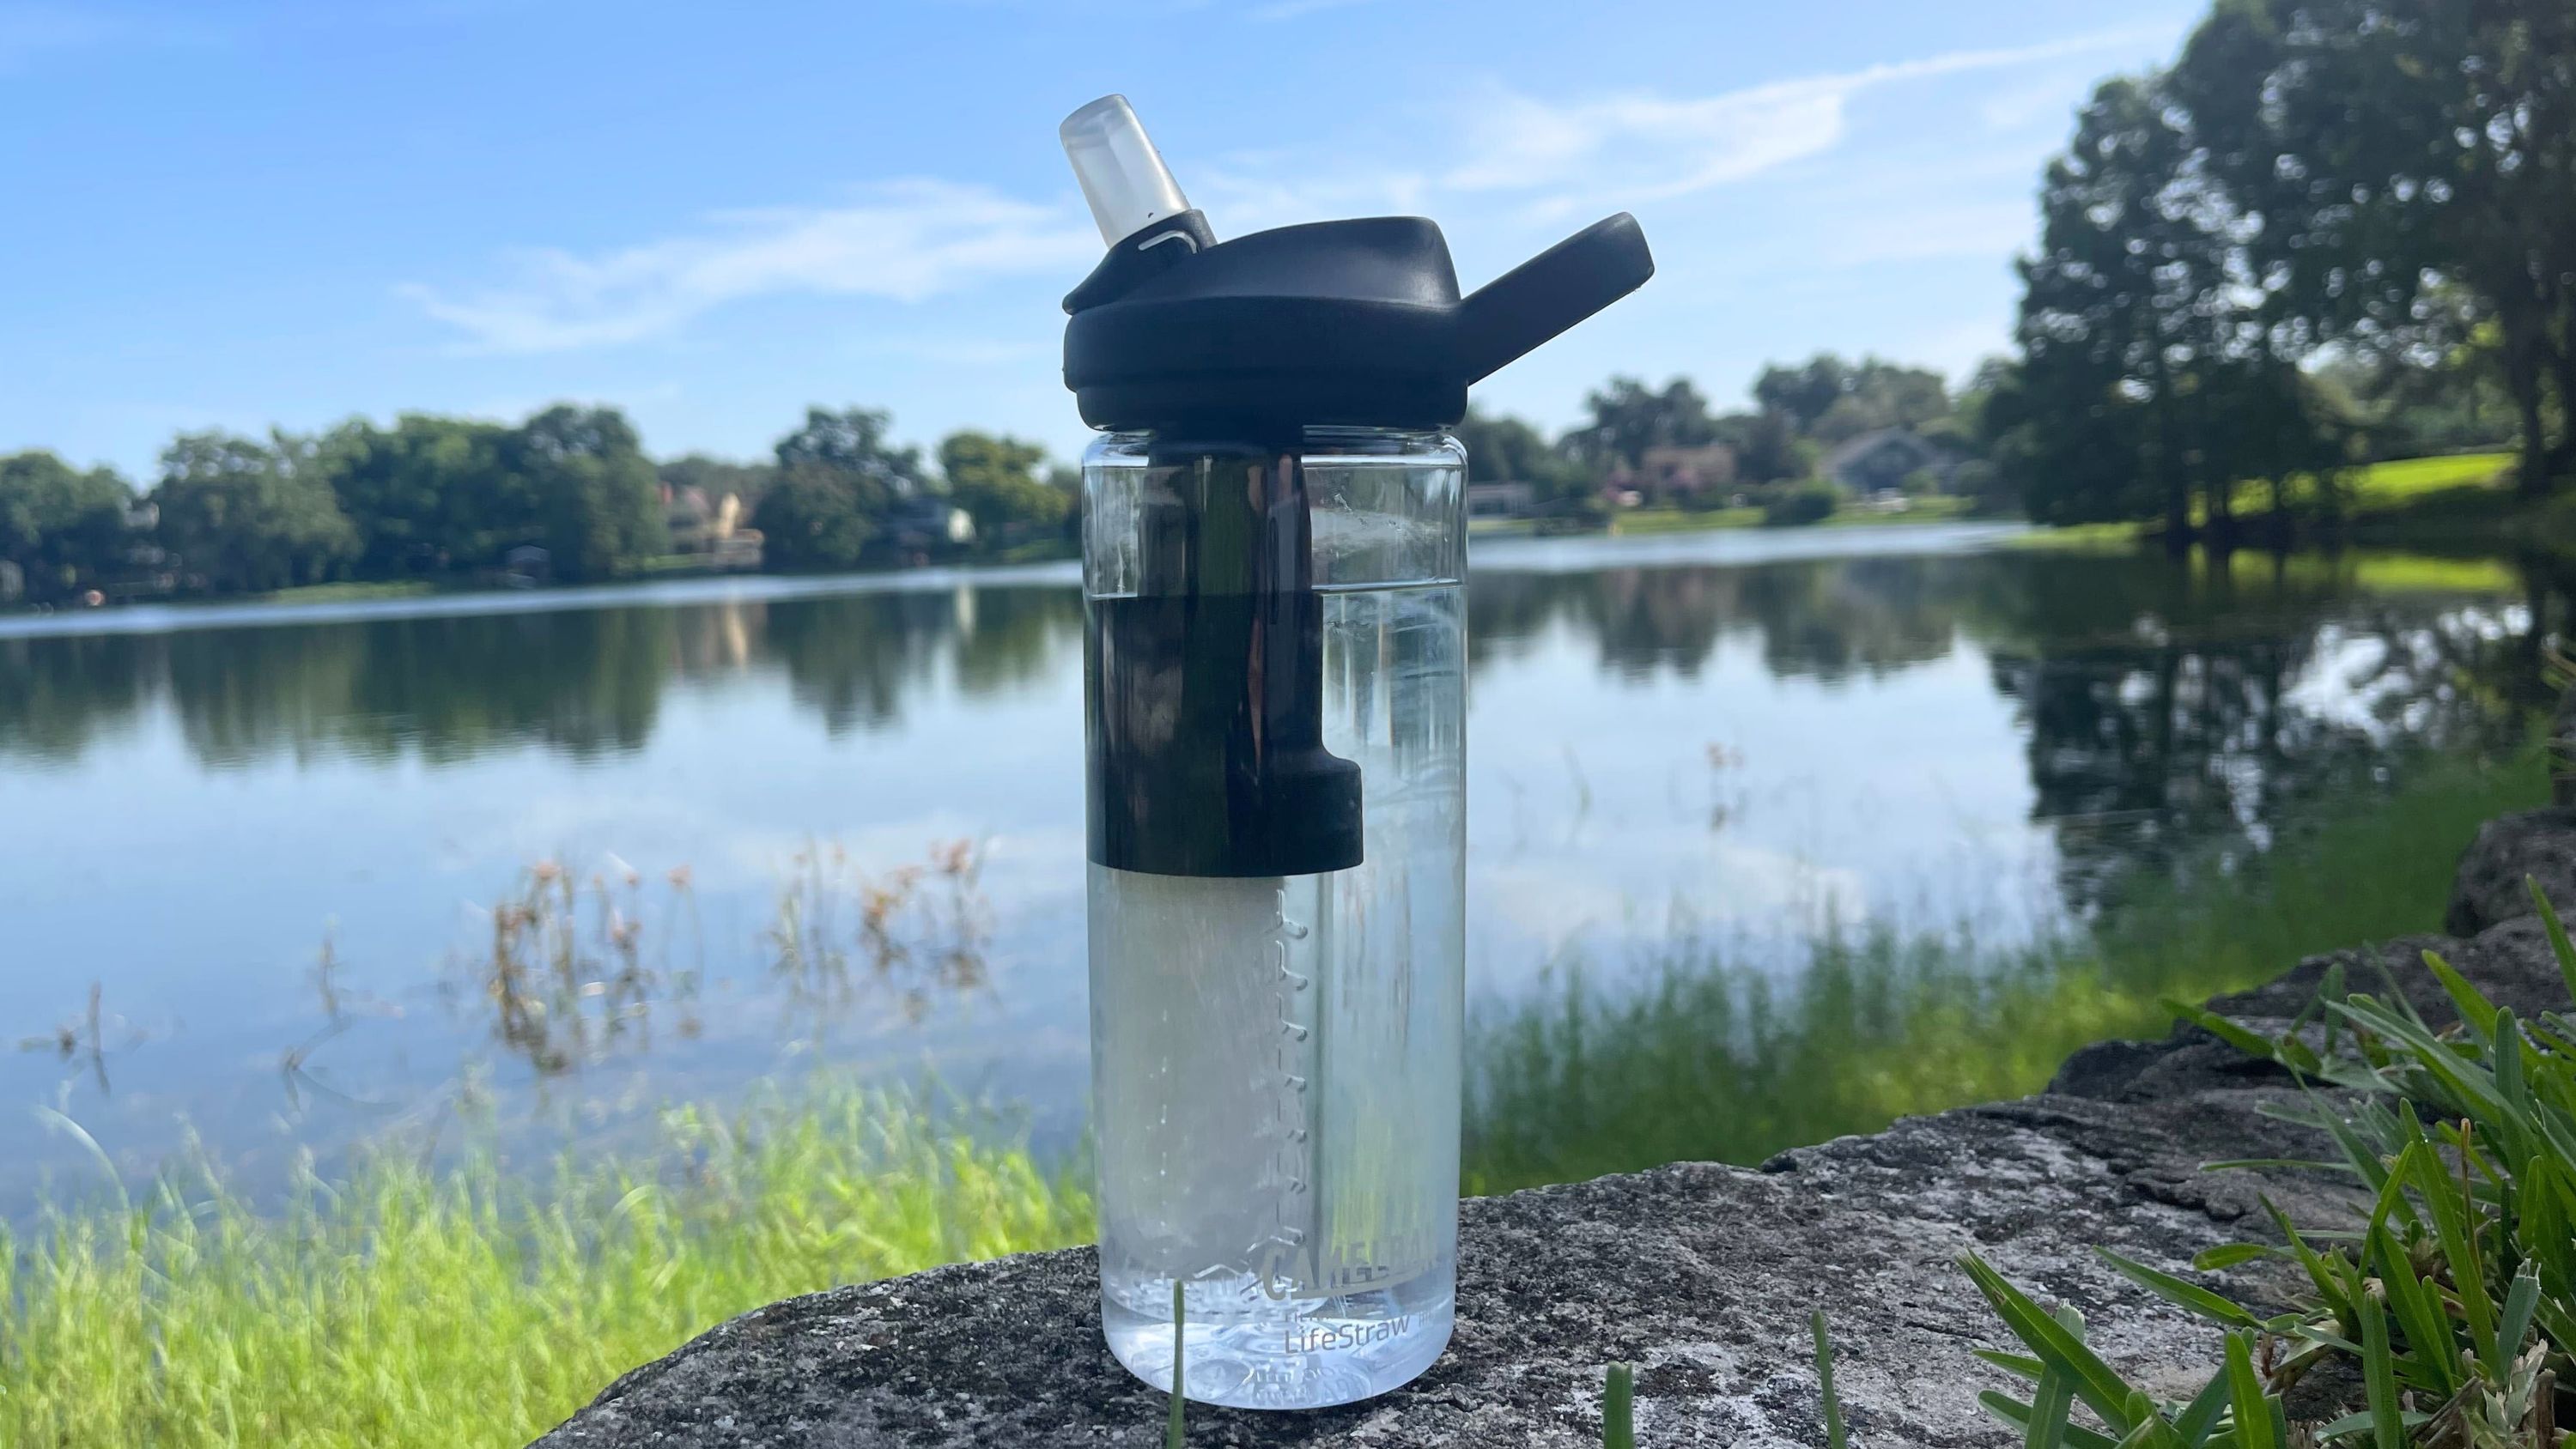 The CamelBak Eddy+ Water Filter Water Bottle by LifeStraw about half full of water, sitting on a stone ledge with a lake in the background